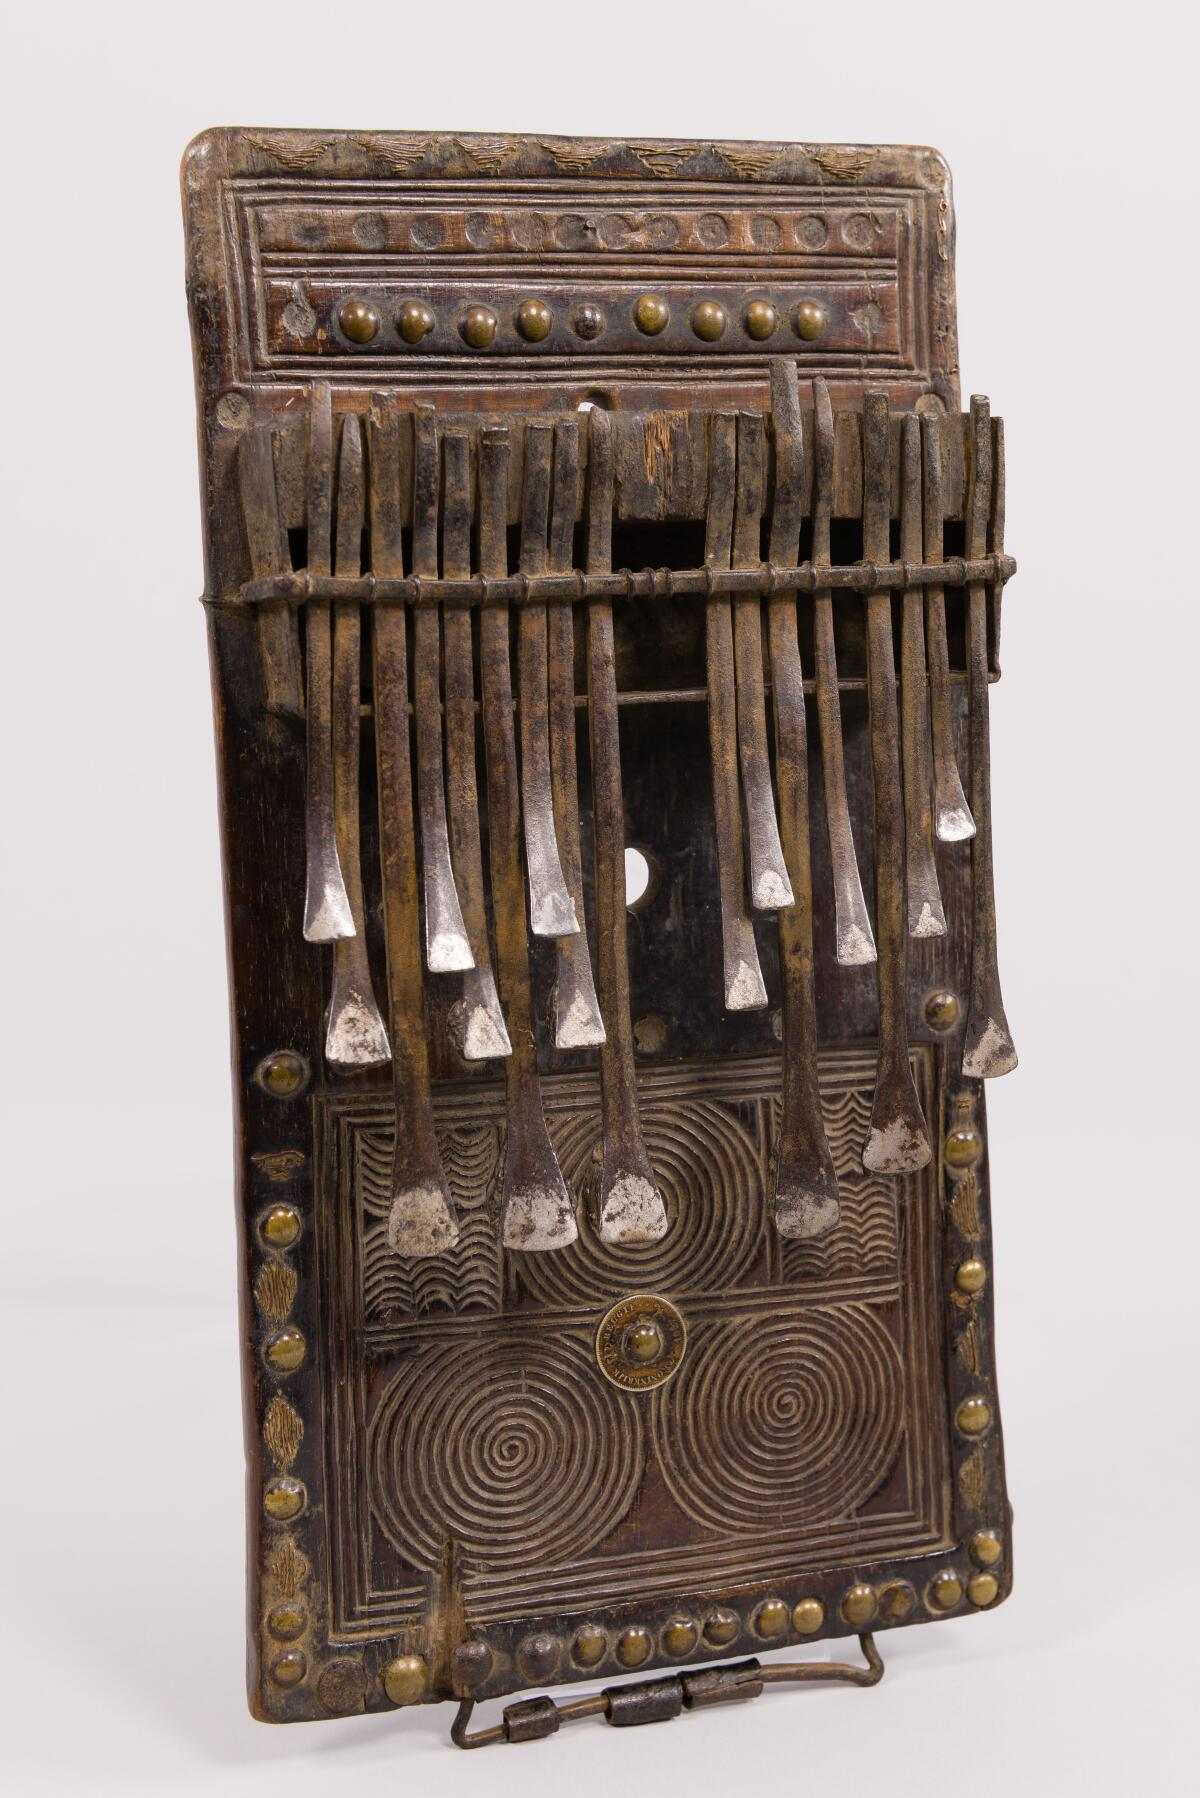 An African lamellophone features a wooden base with iron keys that are flicked with the finger to make music